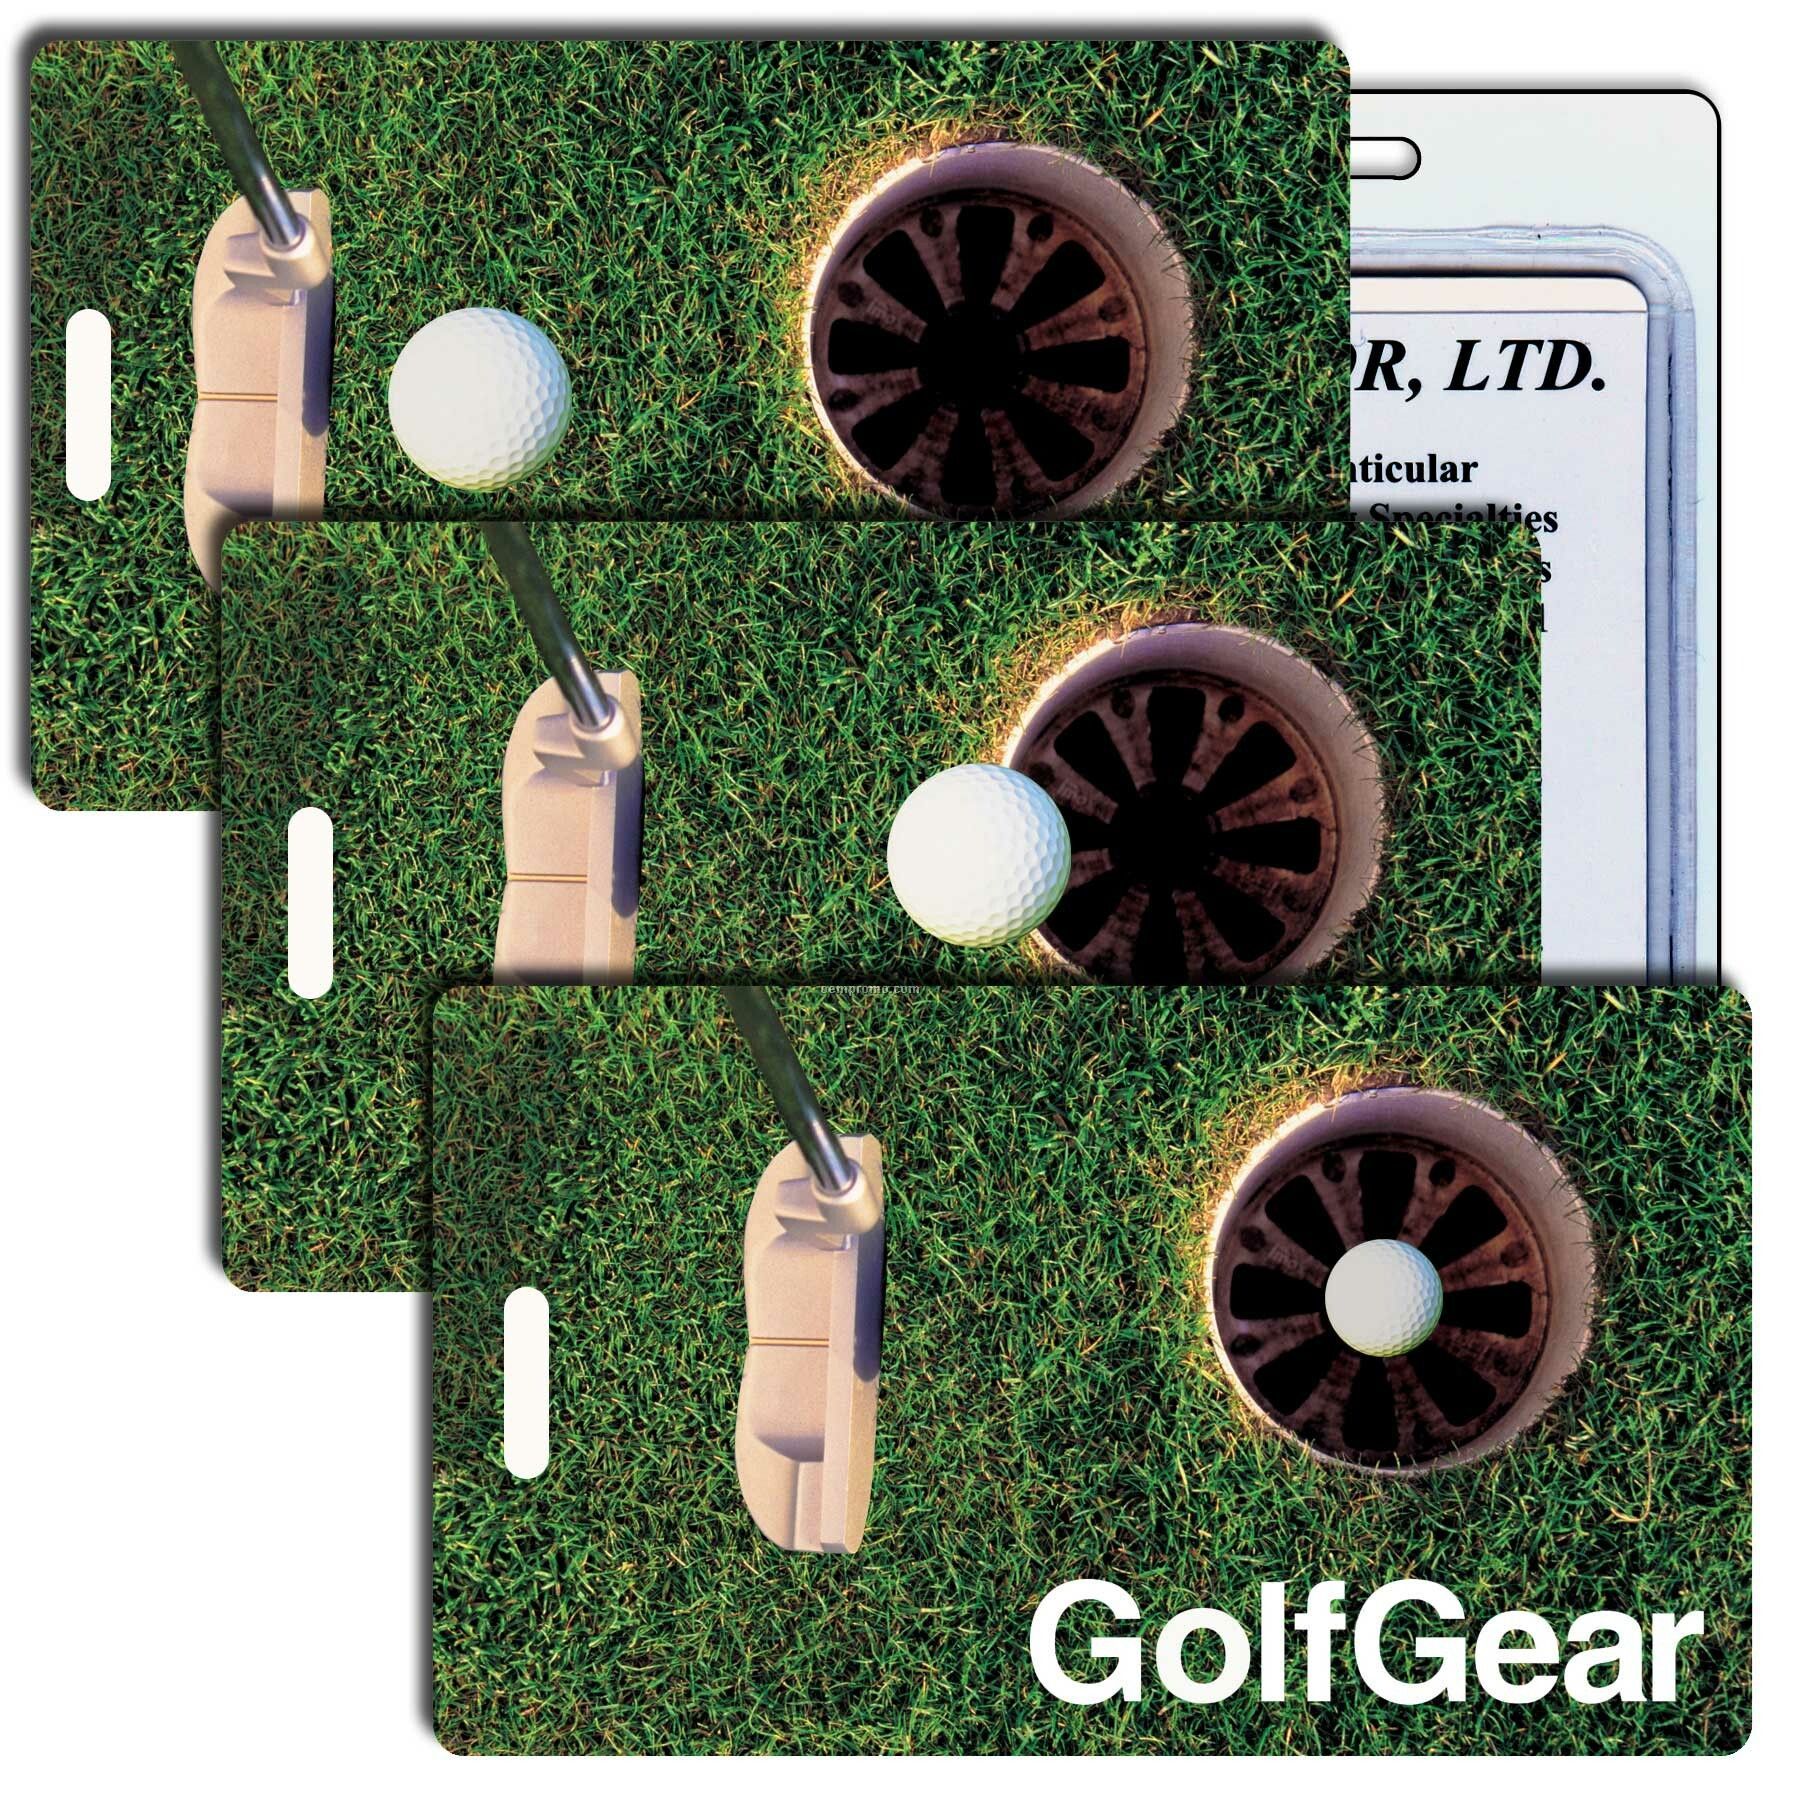 Luggage Tag 3d Lenticular Golf Gear Stock Image (Blank Product)